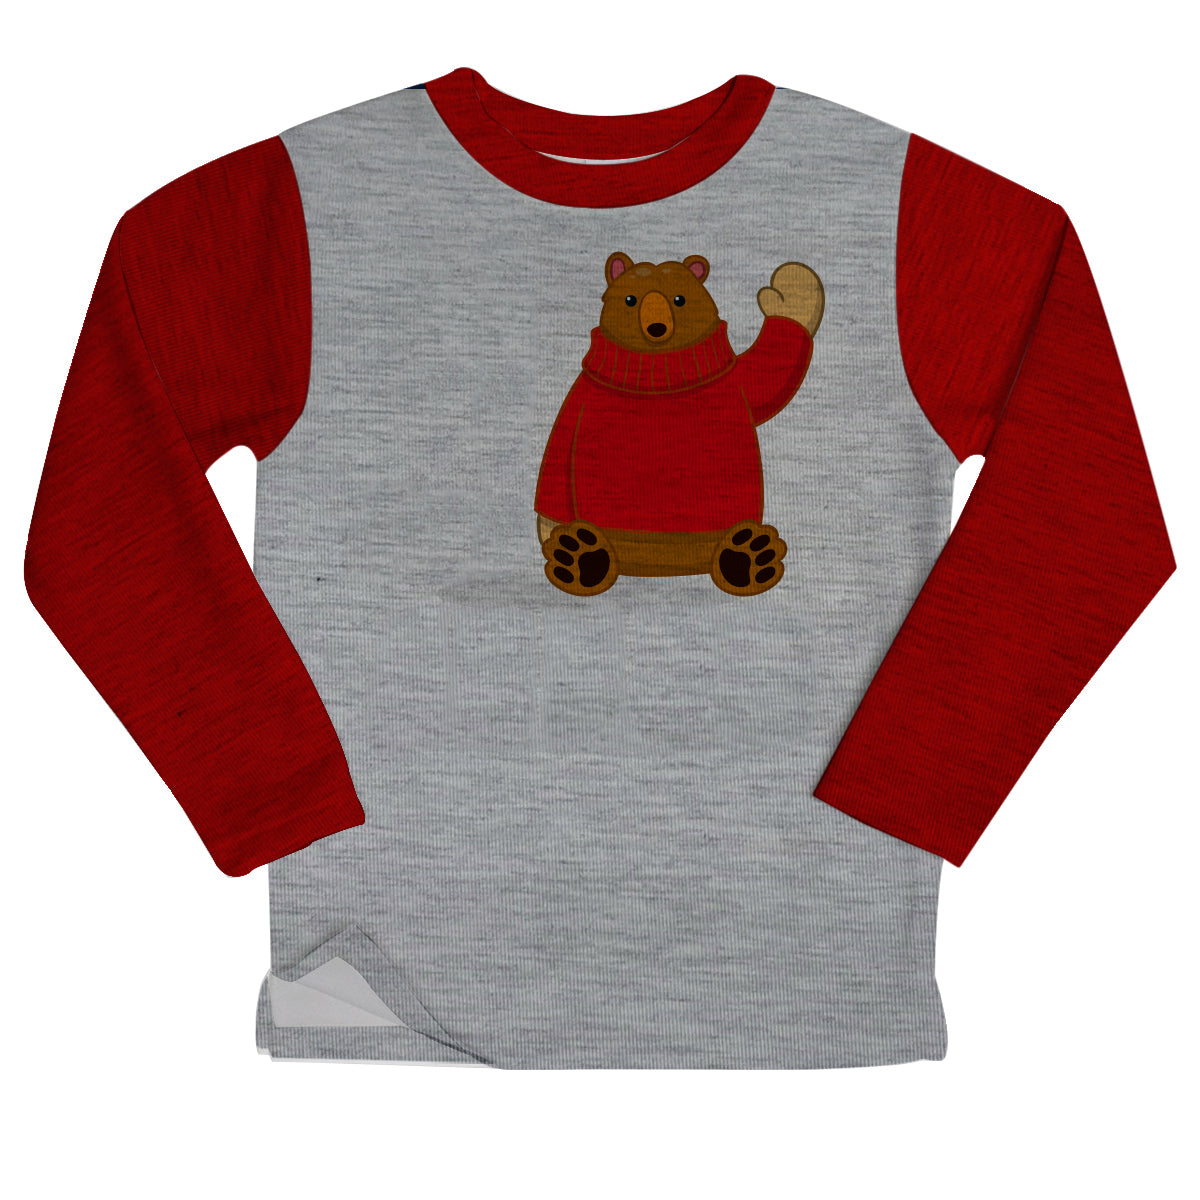 Boys gray and red bear fleece sweatshirt with name and initial - Wimziy&Co.